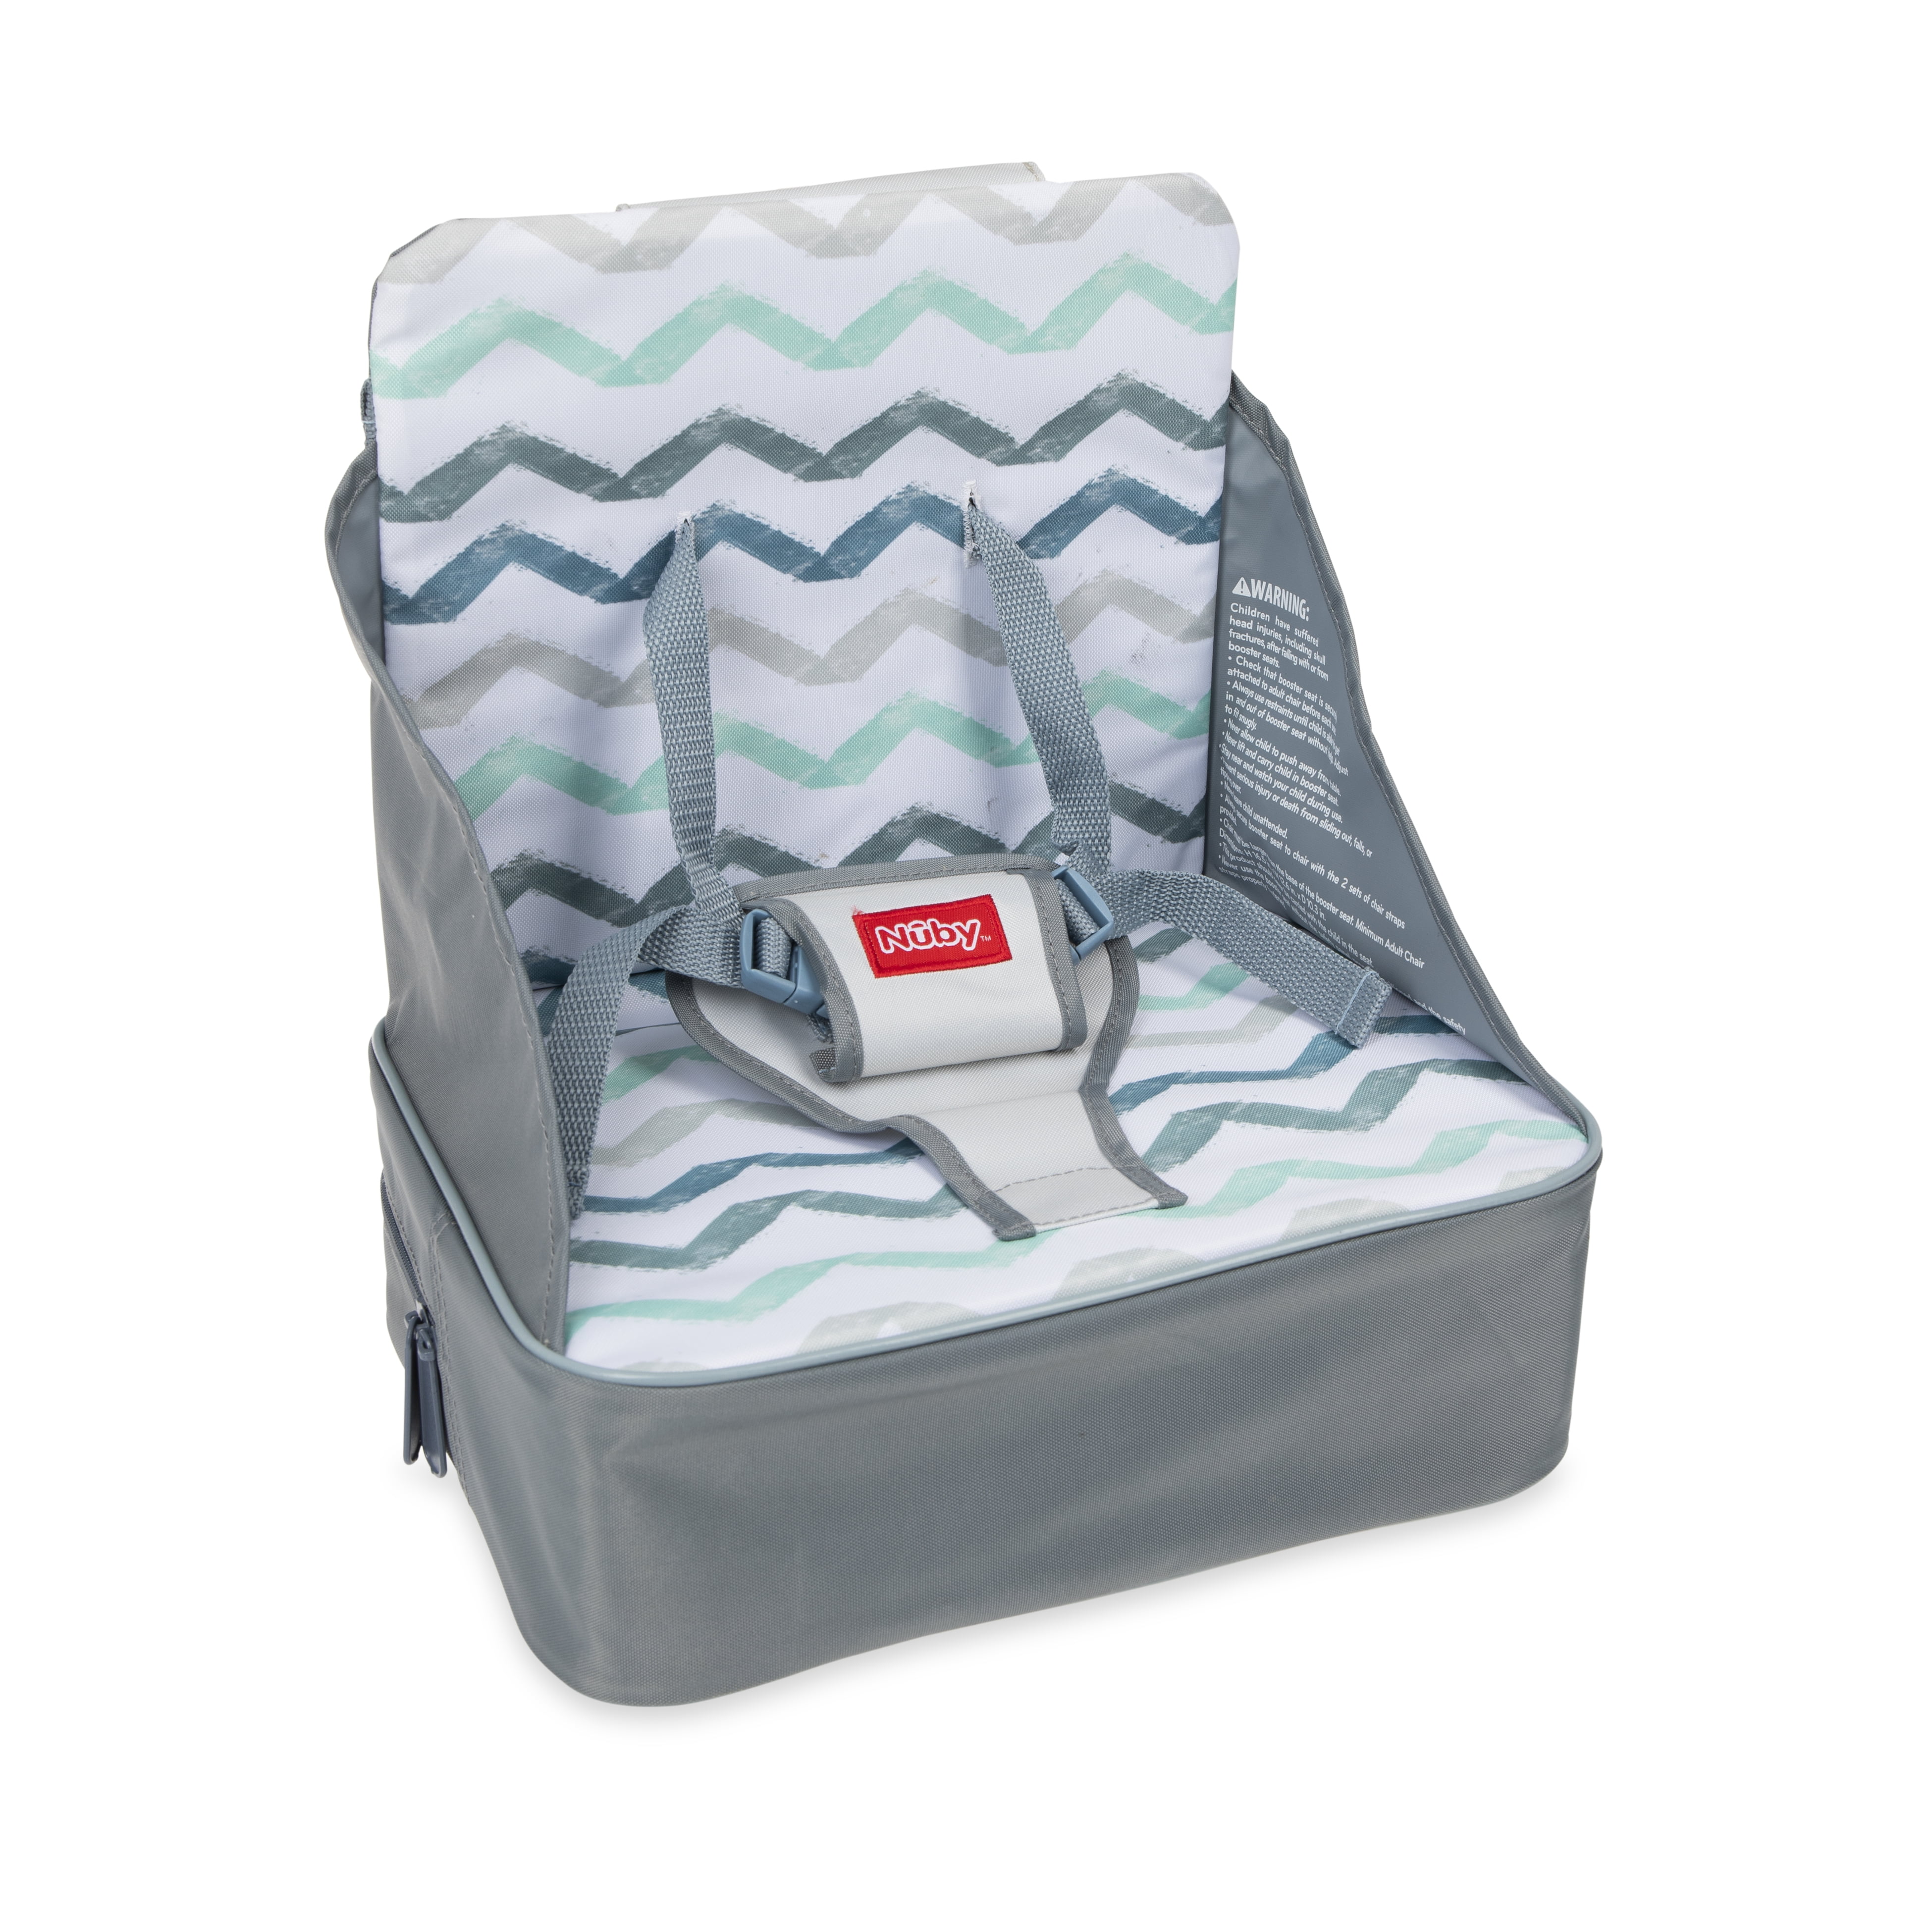 Great for Travel Nuby Easy Go Safety Lightweight High Chair Booster Seat Chevron 